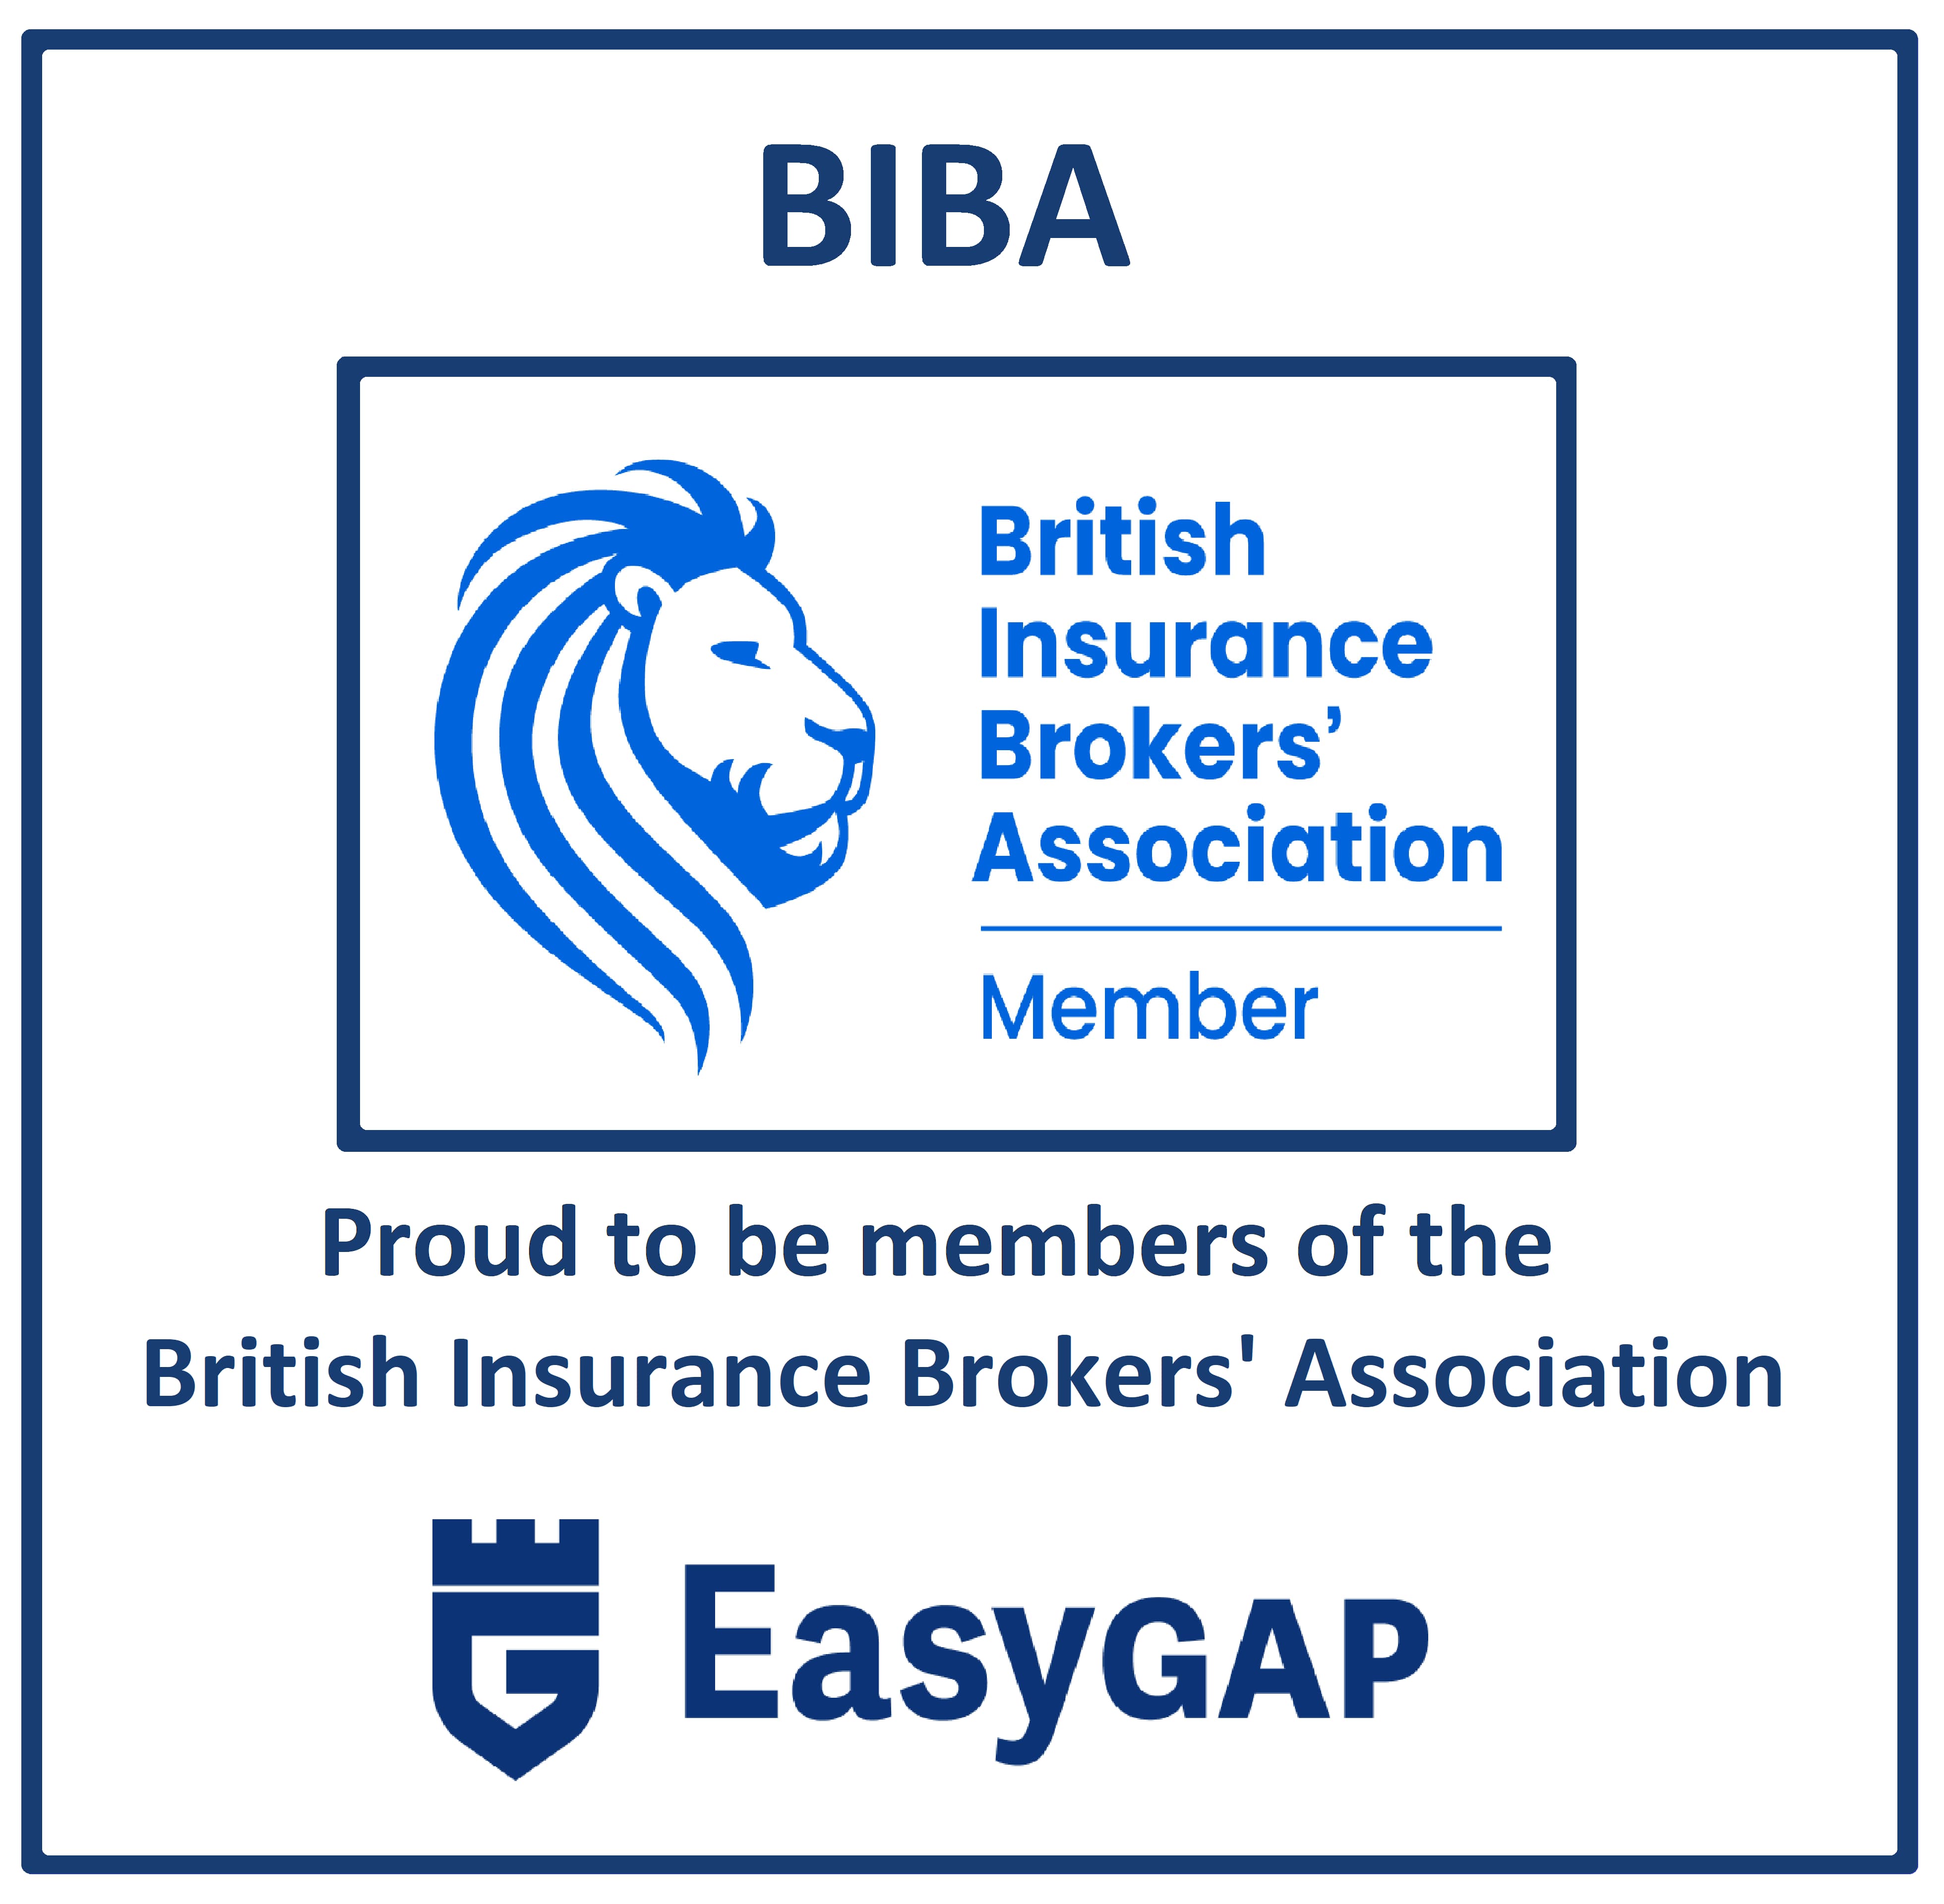 EasyGap Is proud to be members of the British Insurance Brokers Association